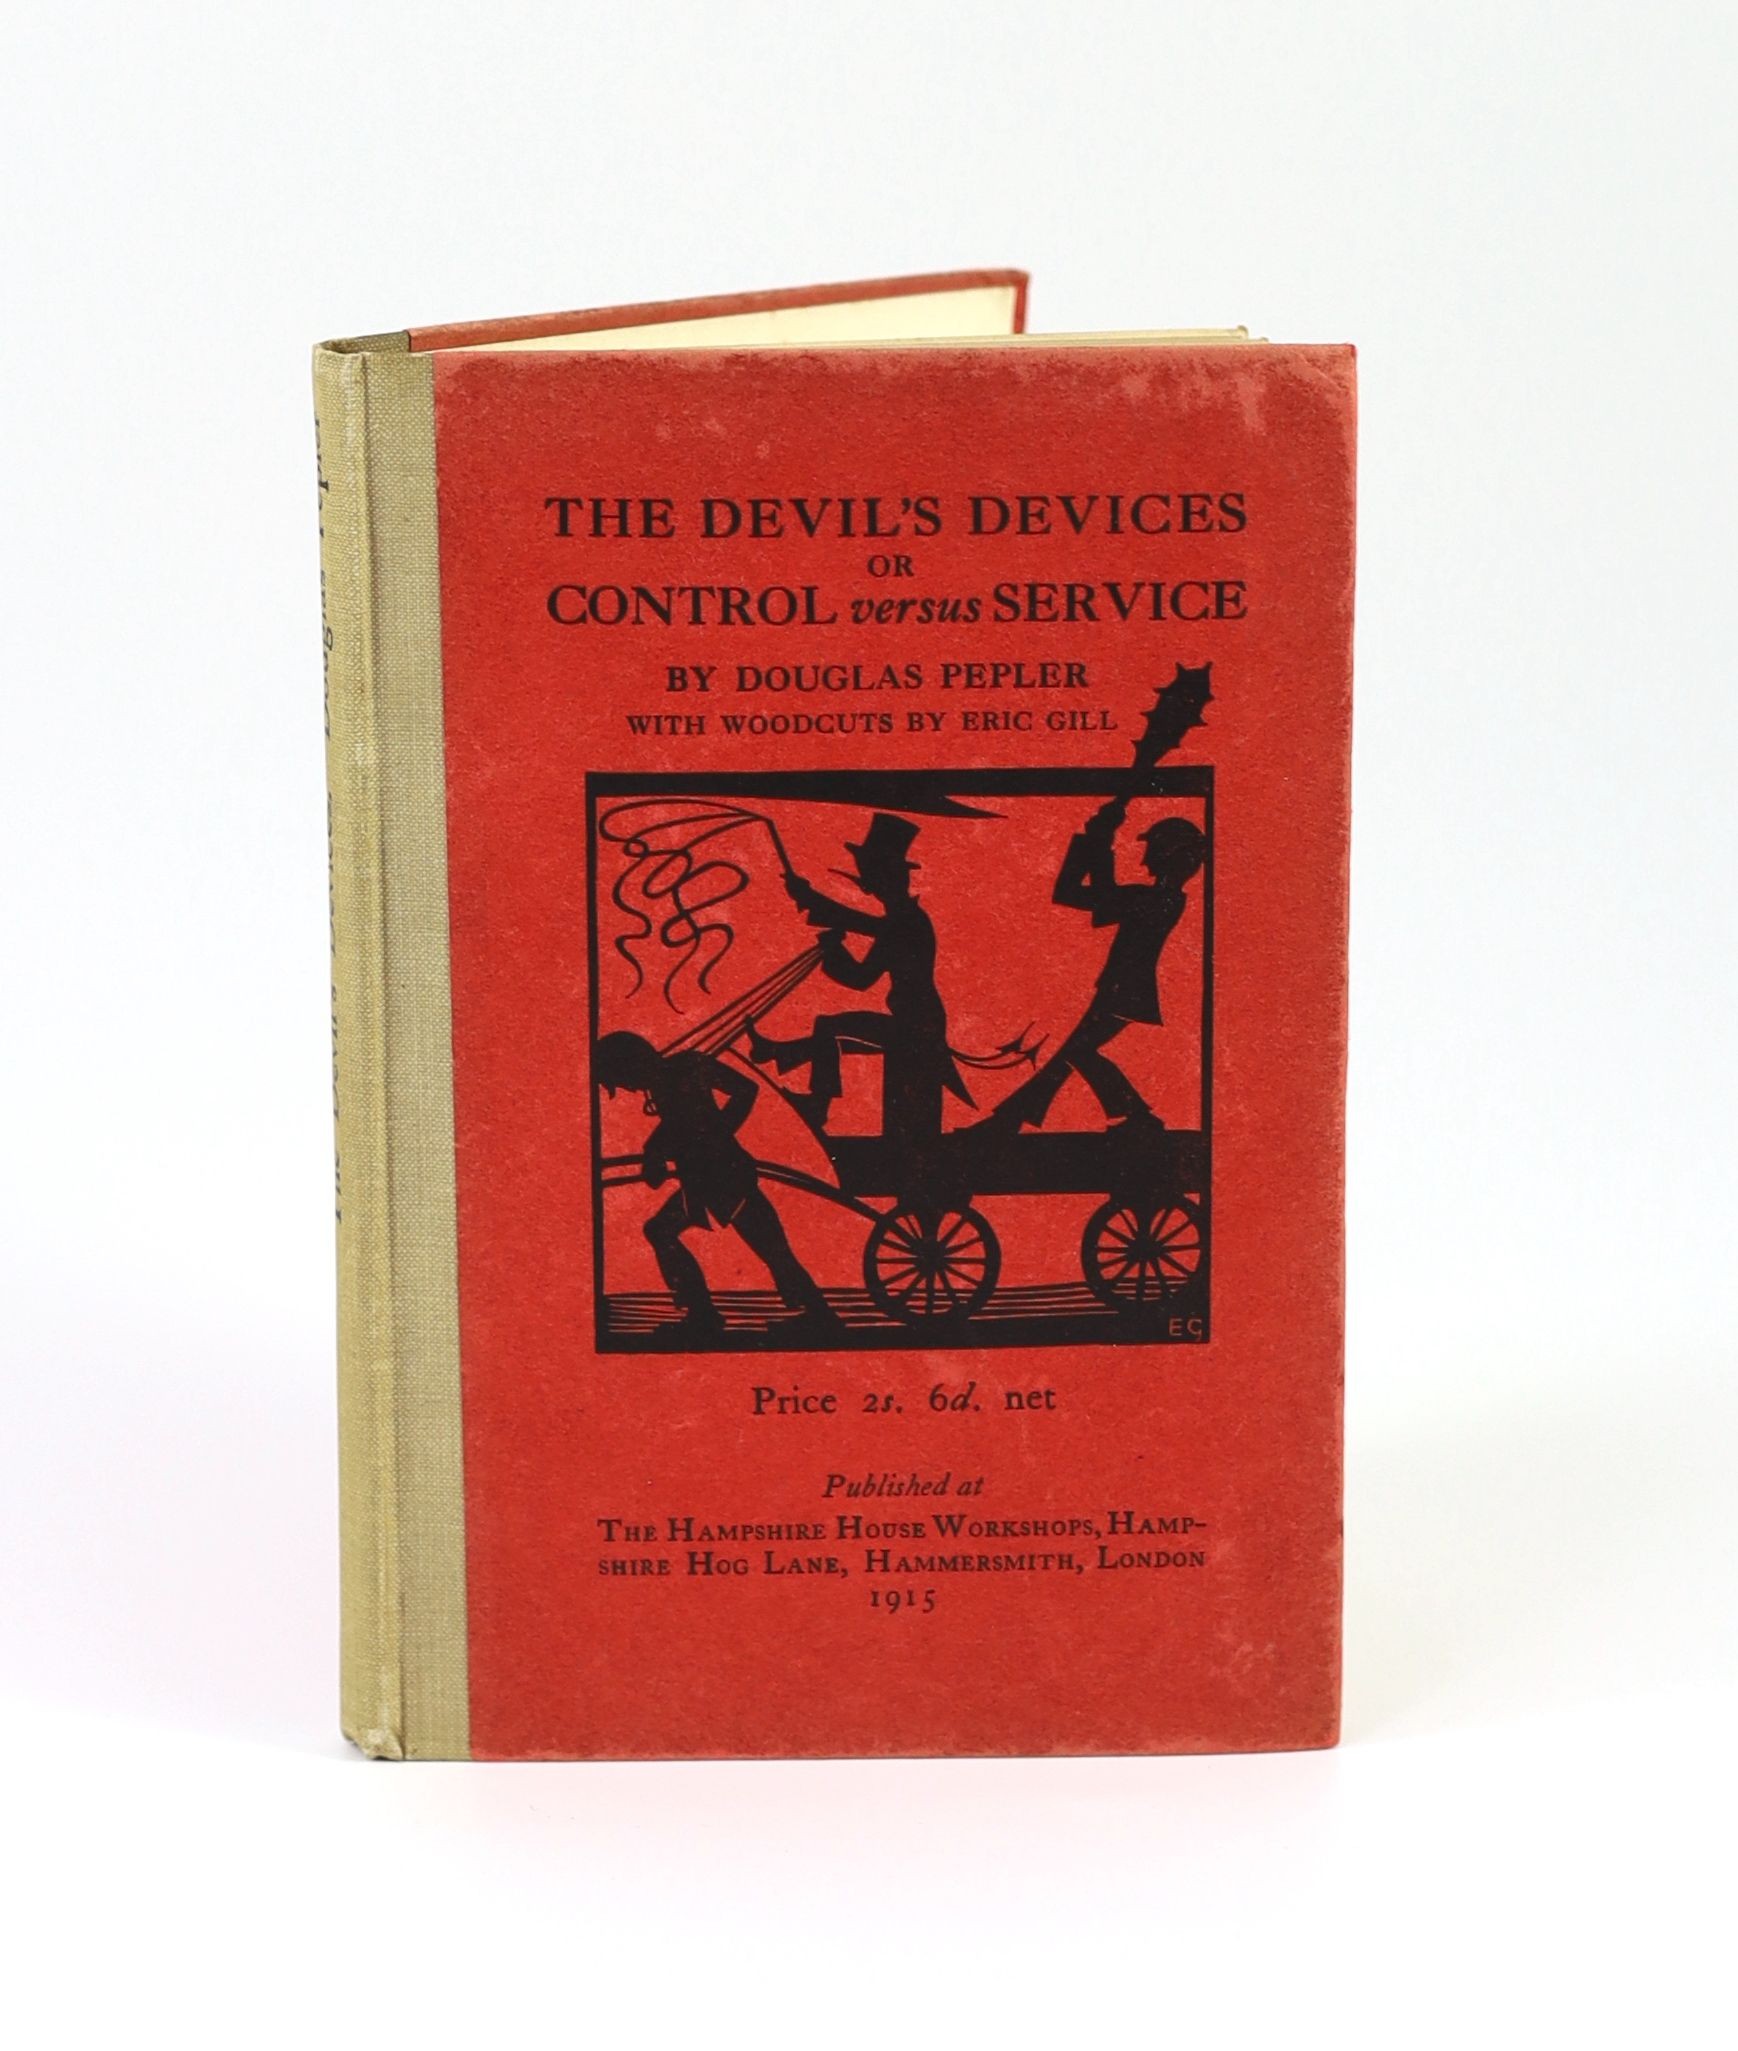 Pepler, Hilary Douglas Clark - The Devil’s Devices, or Control versus Service, illustrated with 11 wood-engravings by Eric Gill, 8vo, cloth backed printed paper boards, The Hampshire House Workshops, London, 1915